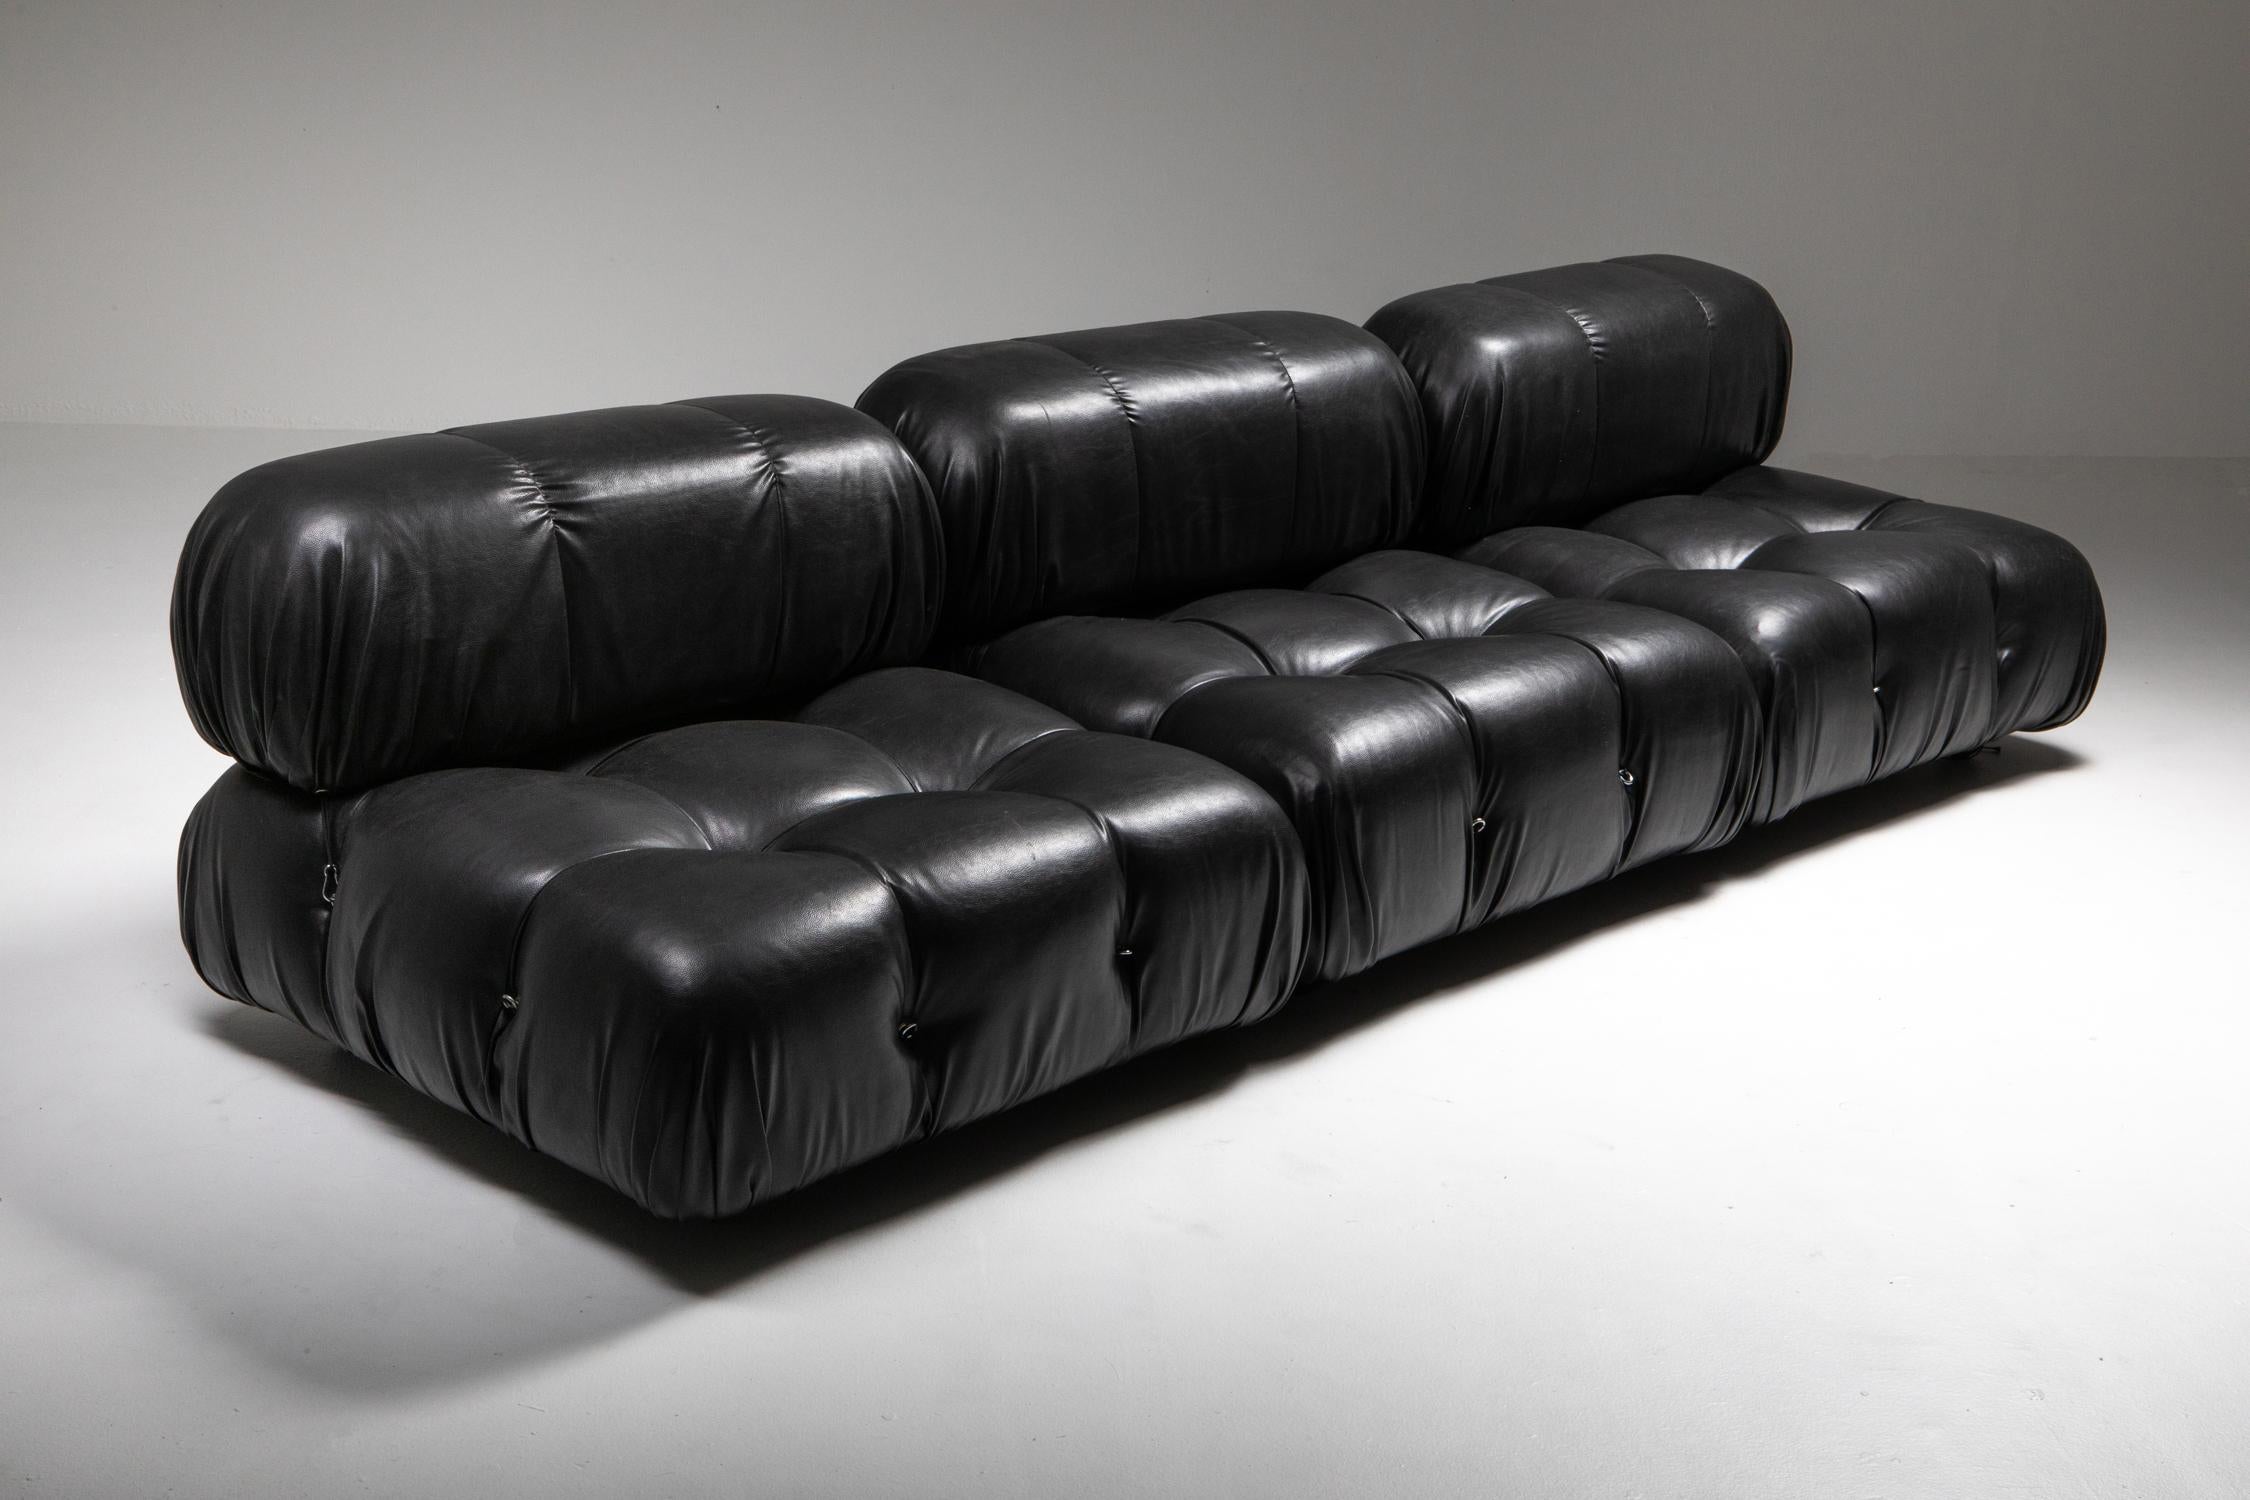 Camaleonda sectional modular sofa, Mario Bellini, C&B Italia, 1970s

Black leather original upholstery

This design became famous almost immediately after it was featured in the exhibition 'Italy and The New Domestic Landscape' in the MoMA